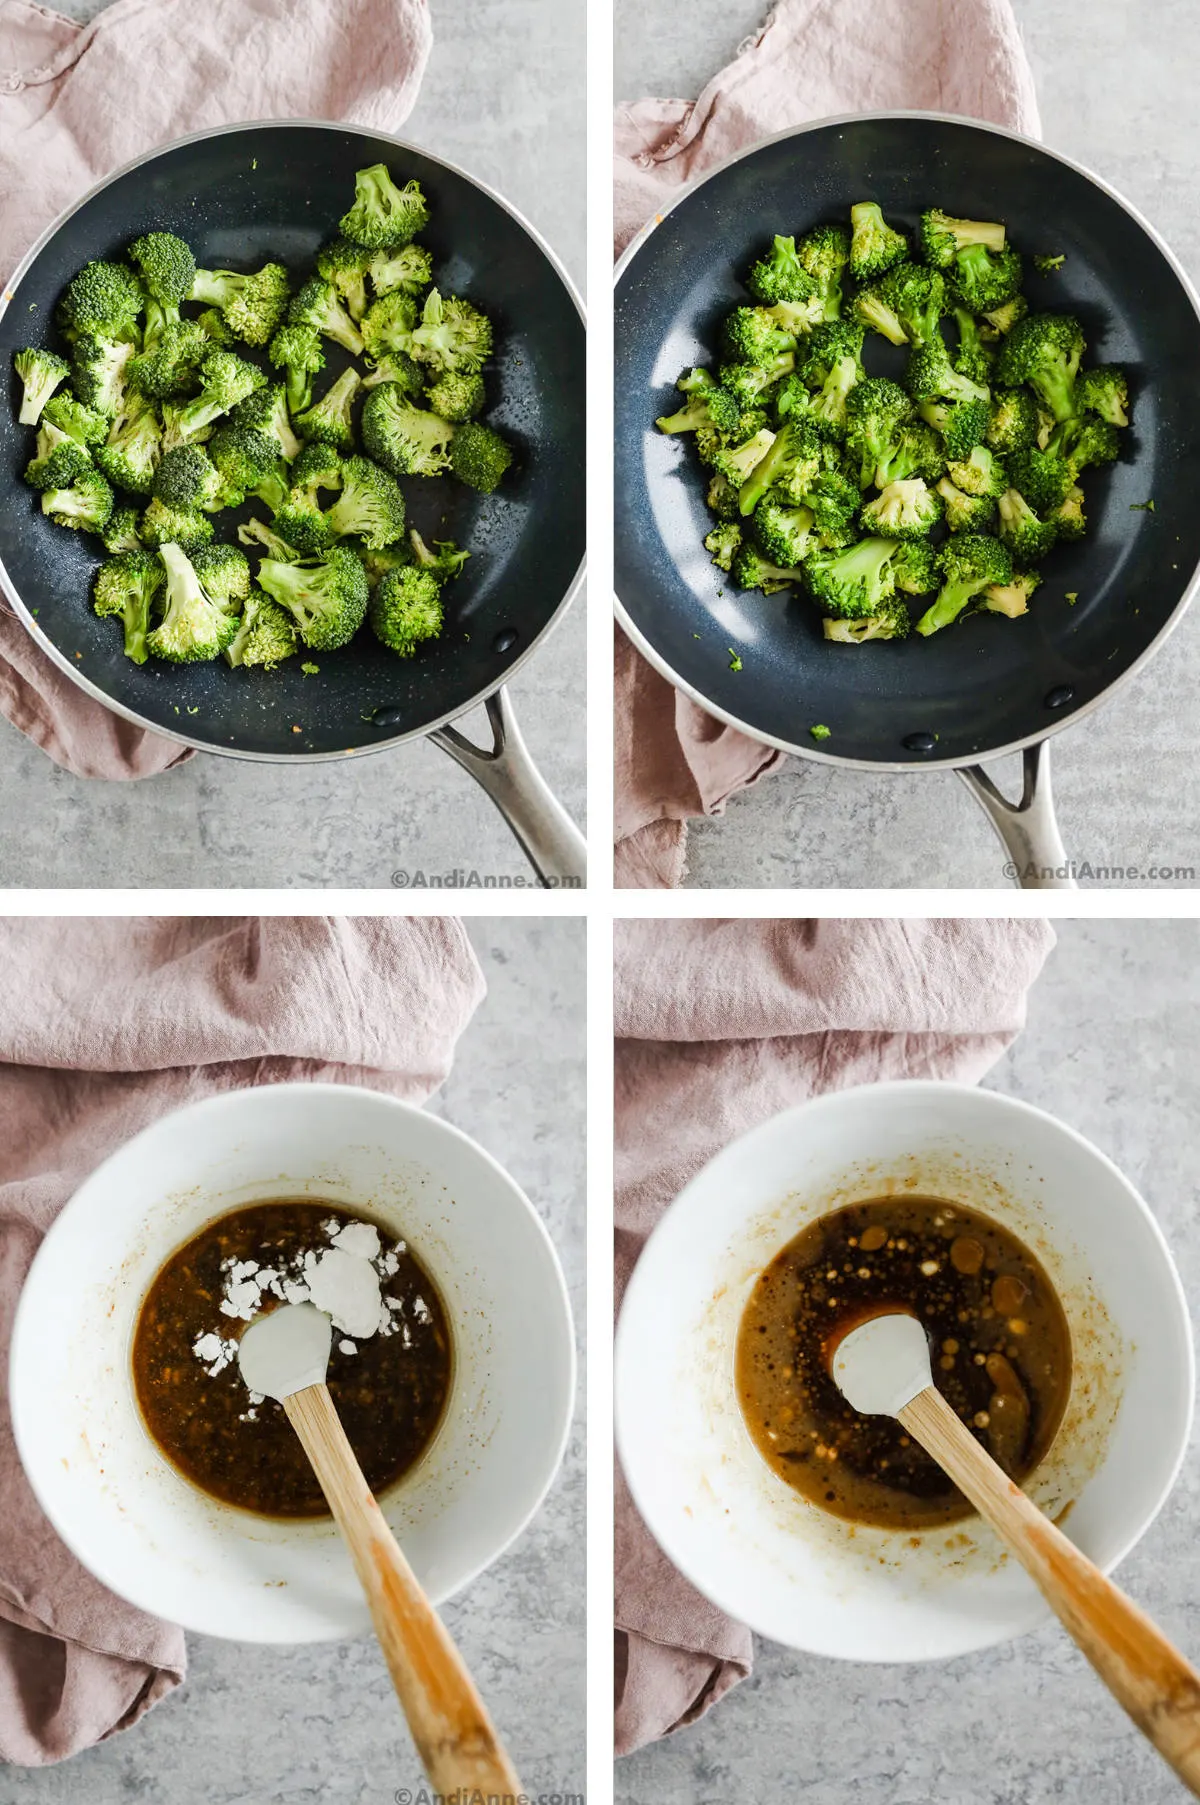 Four overhead images in one: 1. Raw broccoli in frying pan. 2. Cooked broccoli in frying pan. 3. Corn starch is added to the sauce. 3. Corn starch is mixed into the saue. 